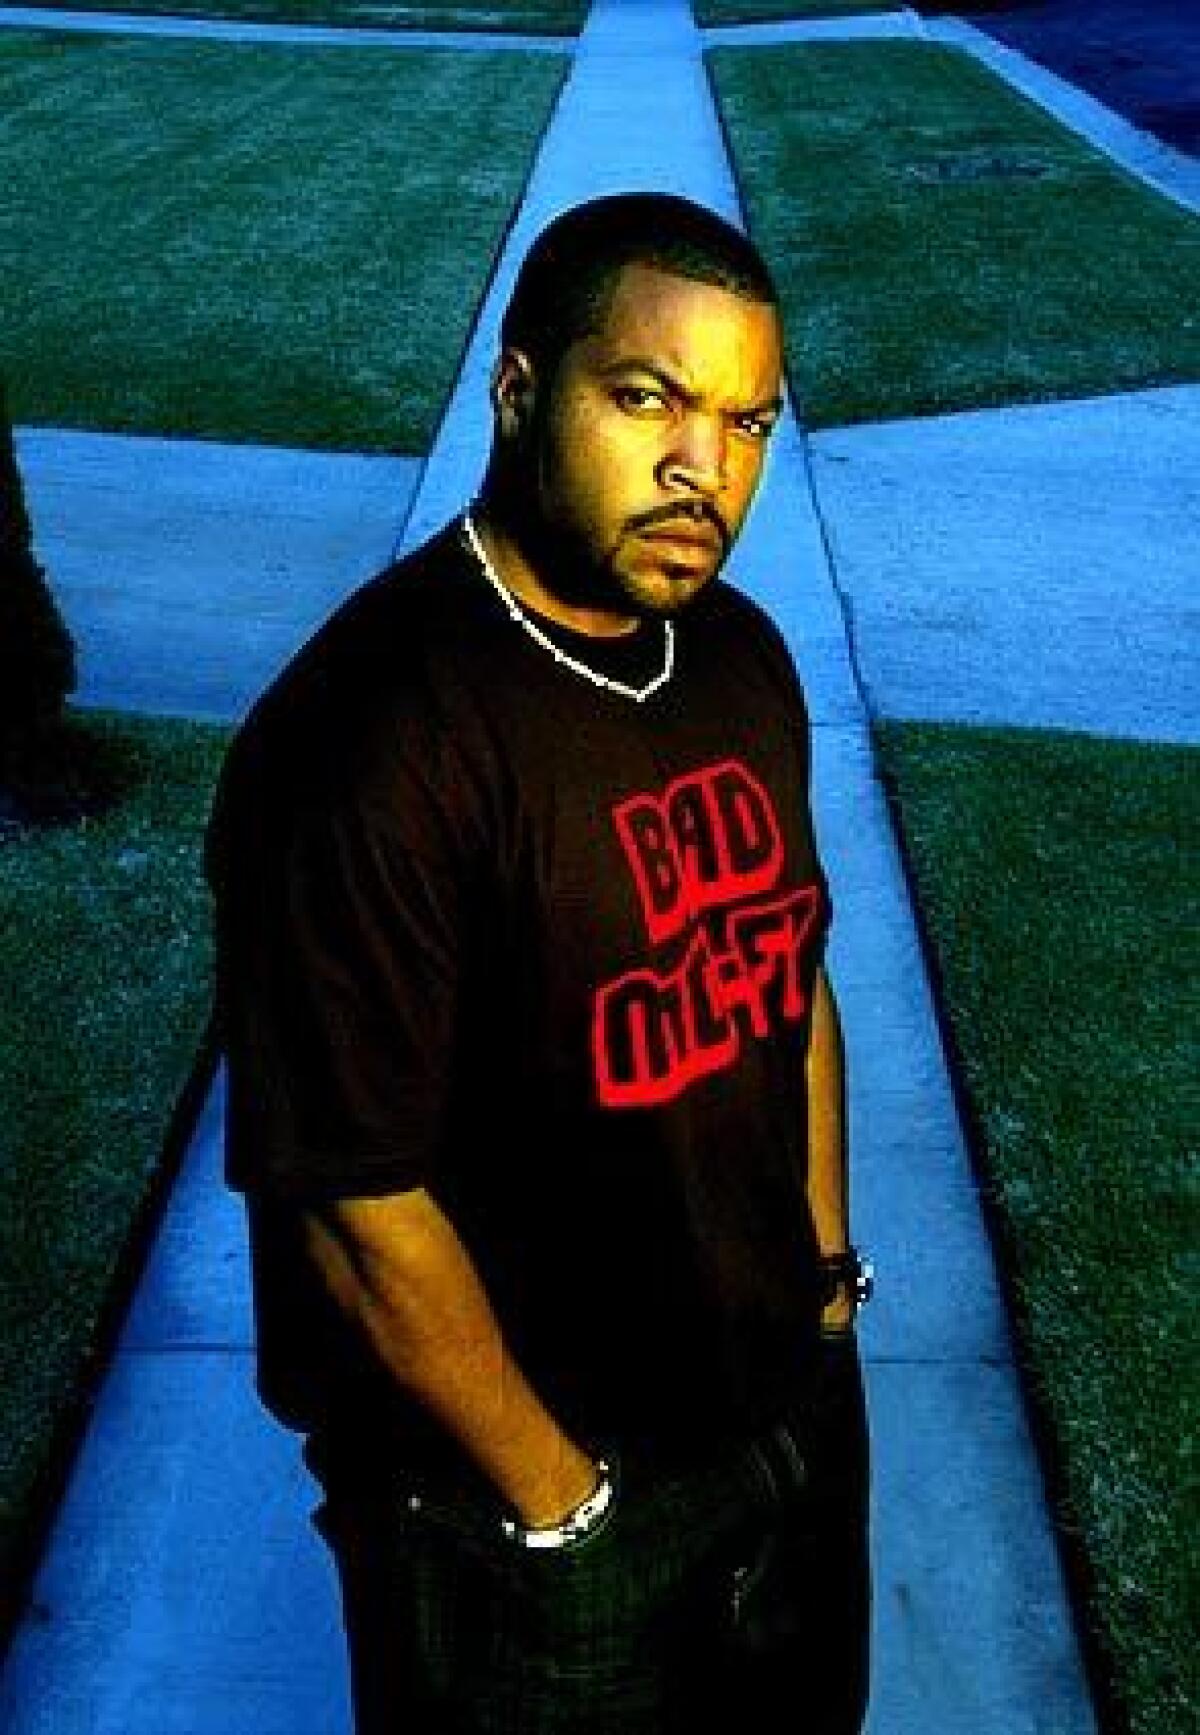 Rapper Ice Cube was the chief lyricist for N.W.A, a group that channeled anger about police treatment and other issues into the album "Straight Outta Compton." "A police car always put you on the alert because you heard so many horror stories," Ice Cube once said.